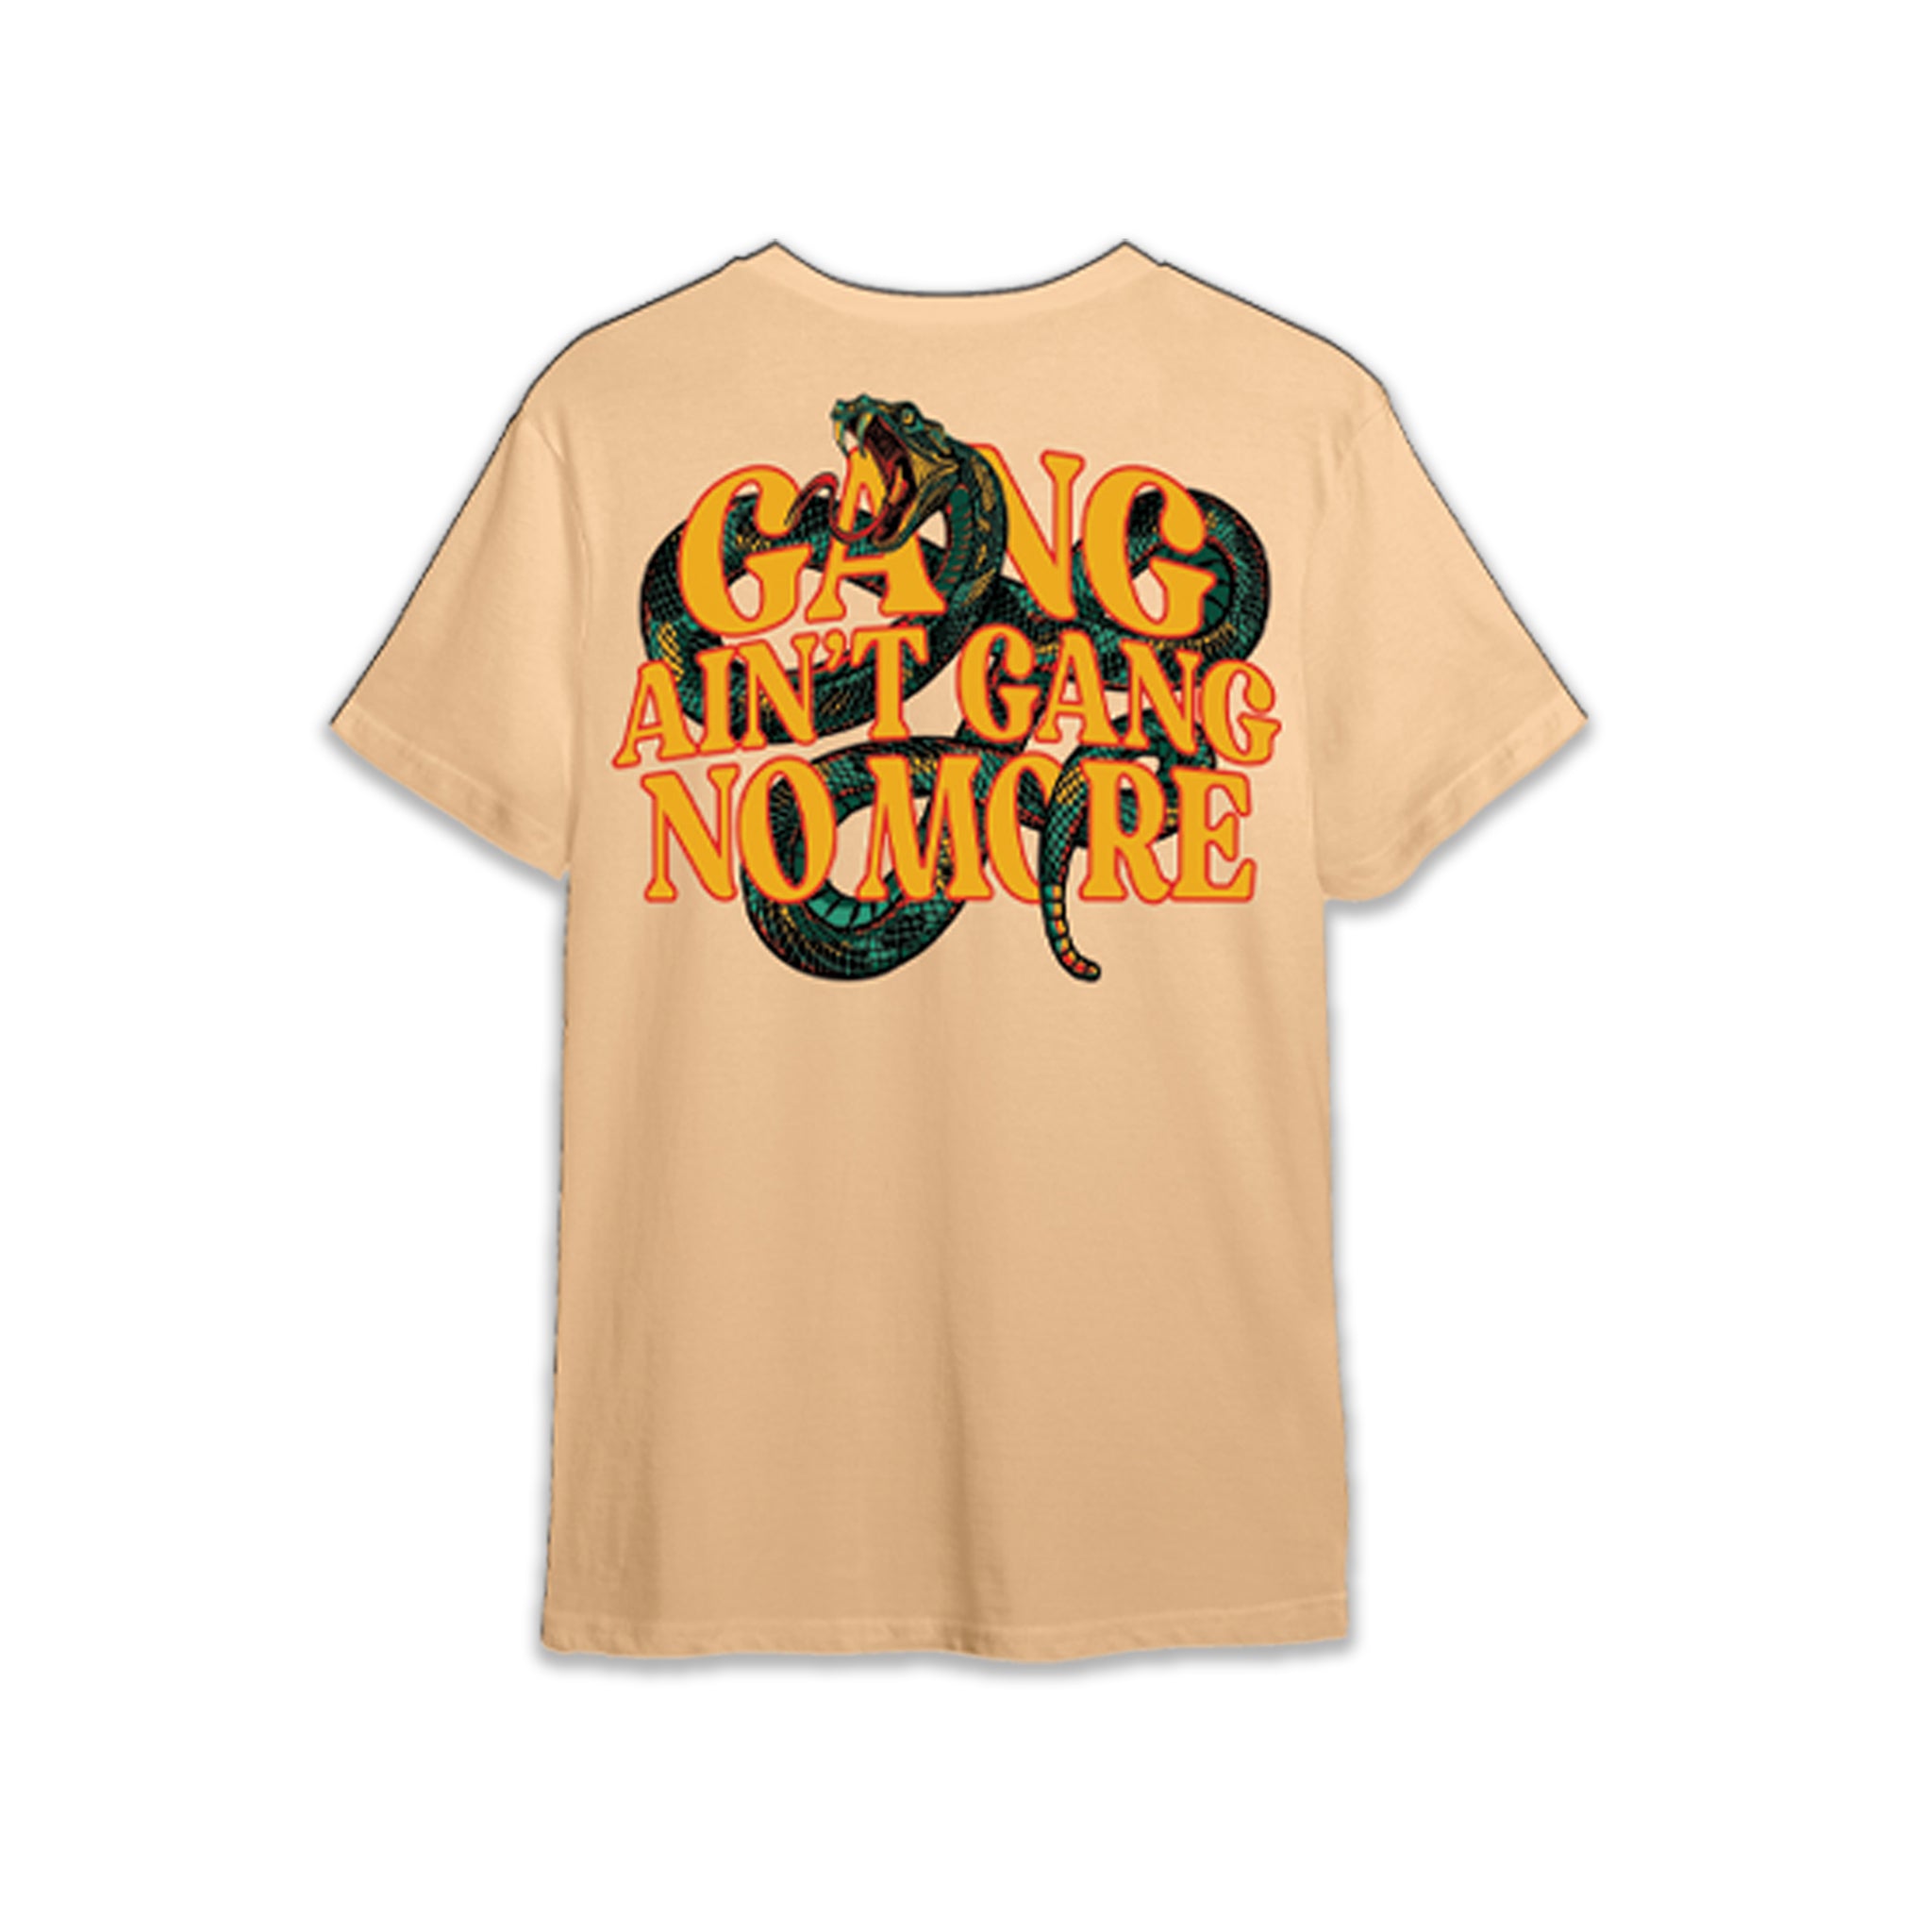 SNAKES IN THE GRASS Tee (Tan)